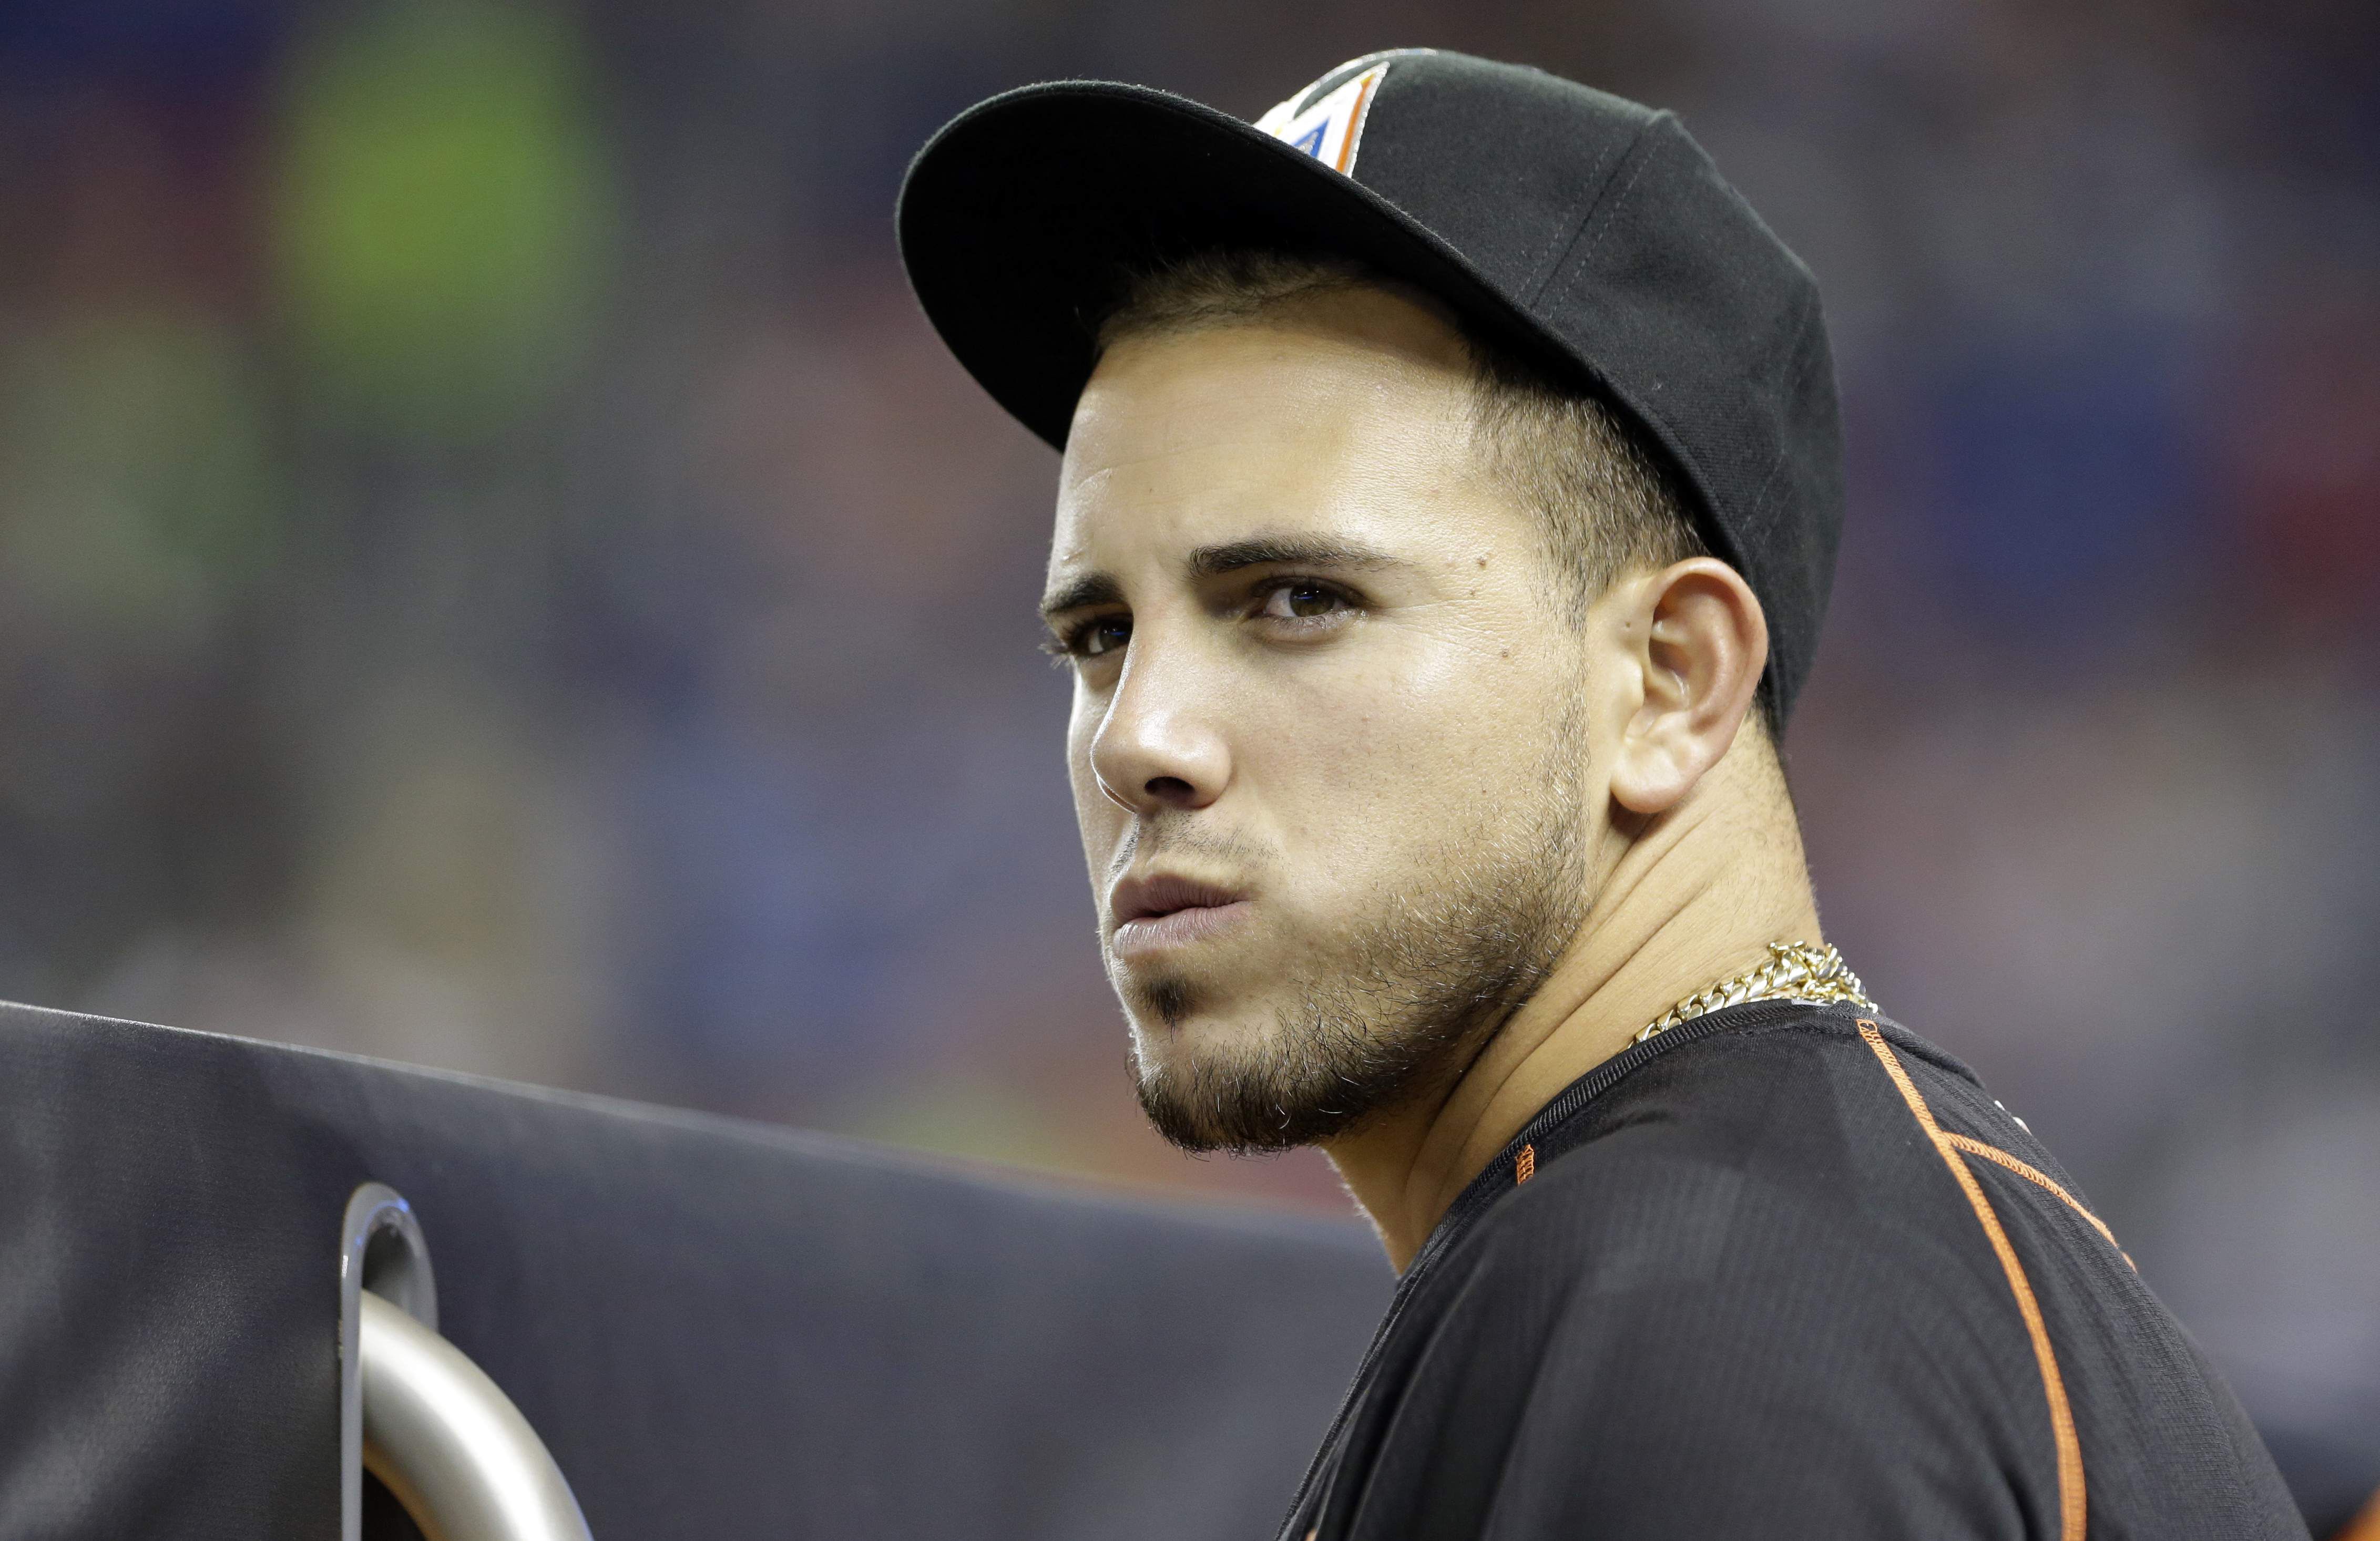 Jose Fernandez wanted to pitch for the Tampa Bay Rays - DRaysBay